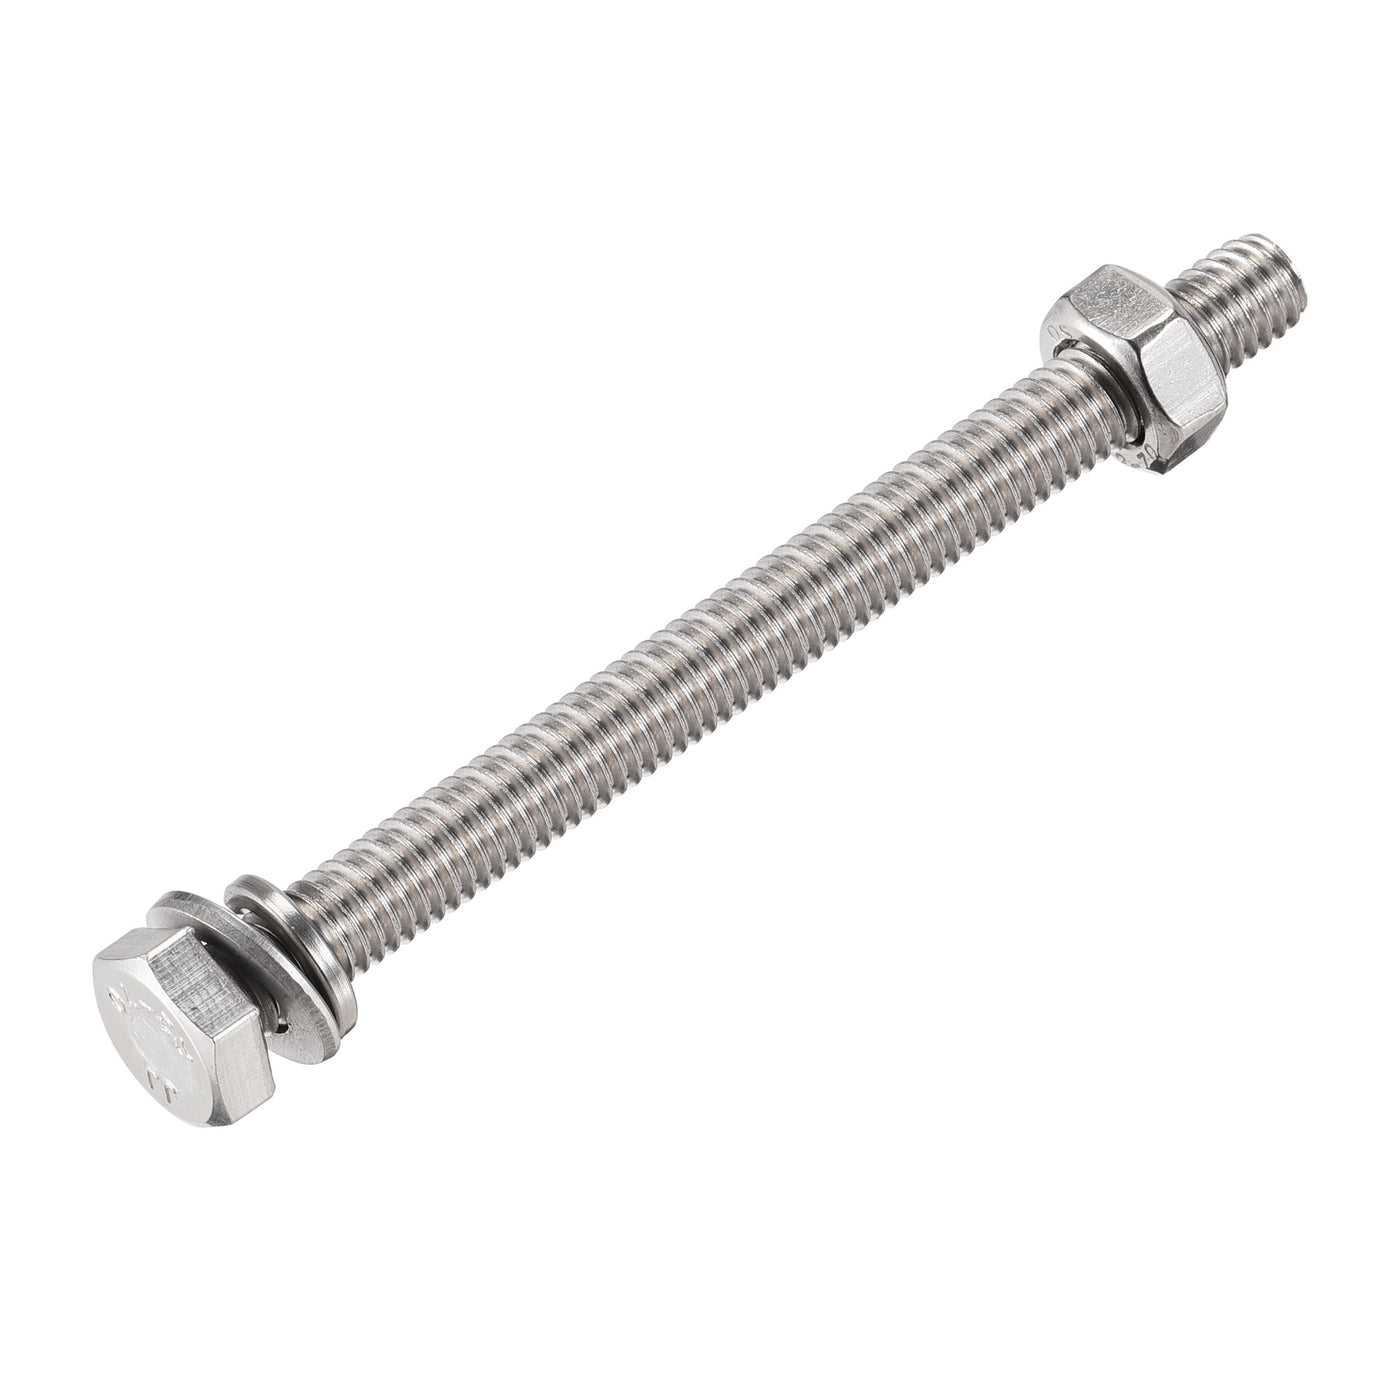 Uxcell Uxcell M6 x 80mm Hex Head Screws Bolts, Nuts, Flat & Lock Washers Kits, 304 Stainless Steel Fully Thread Hexagon Bolts 10 Sets